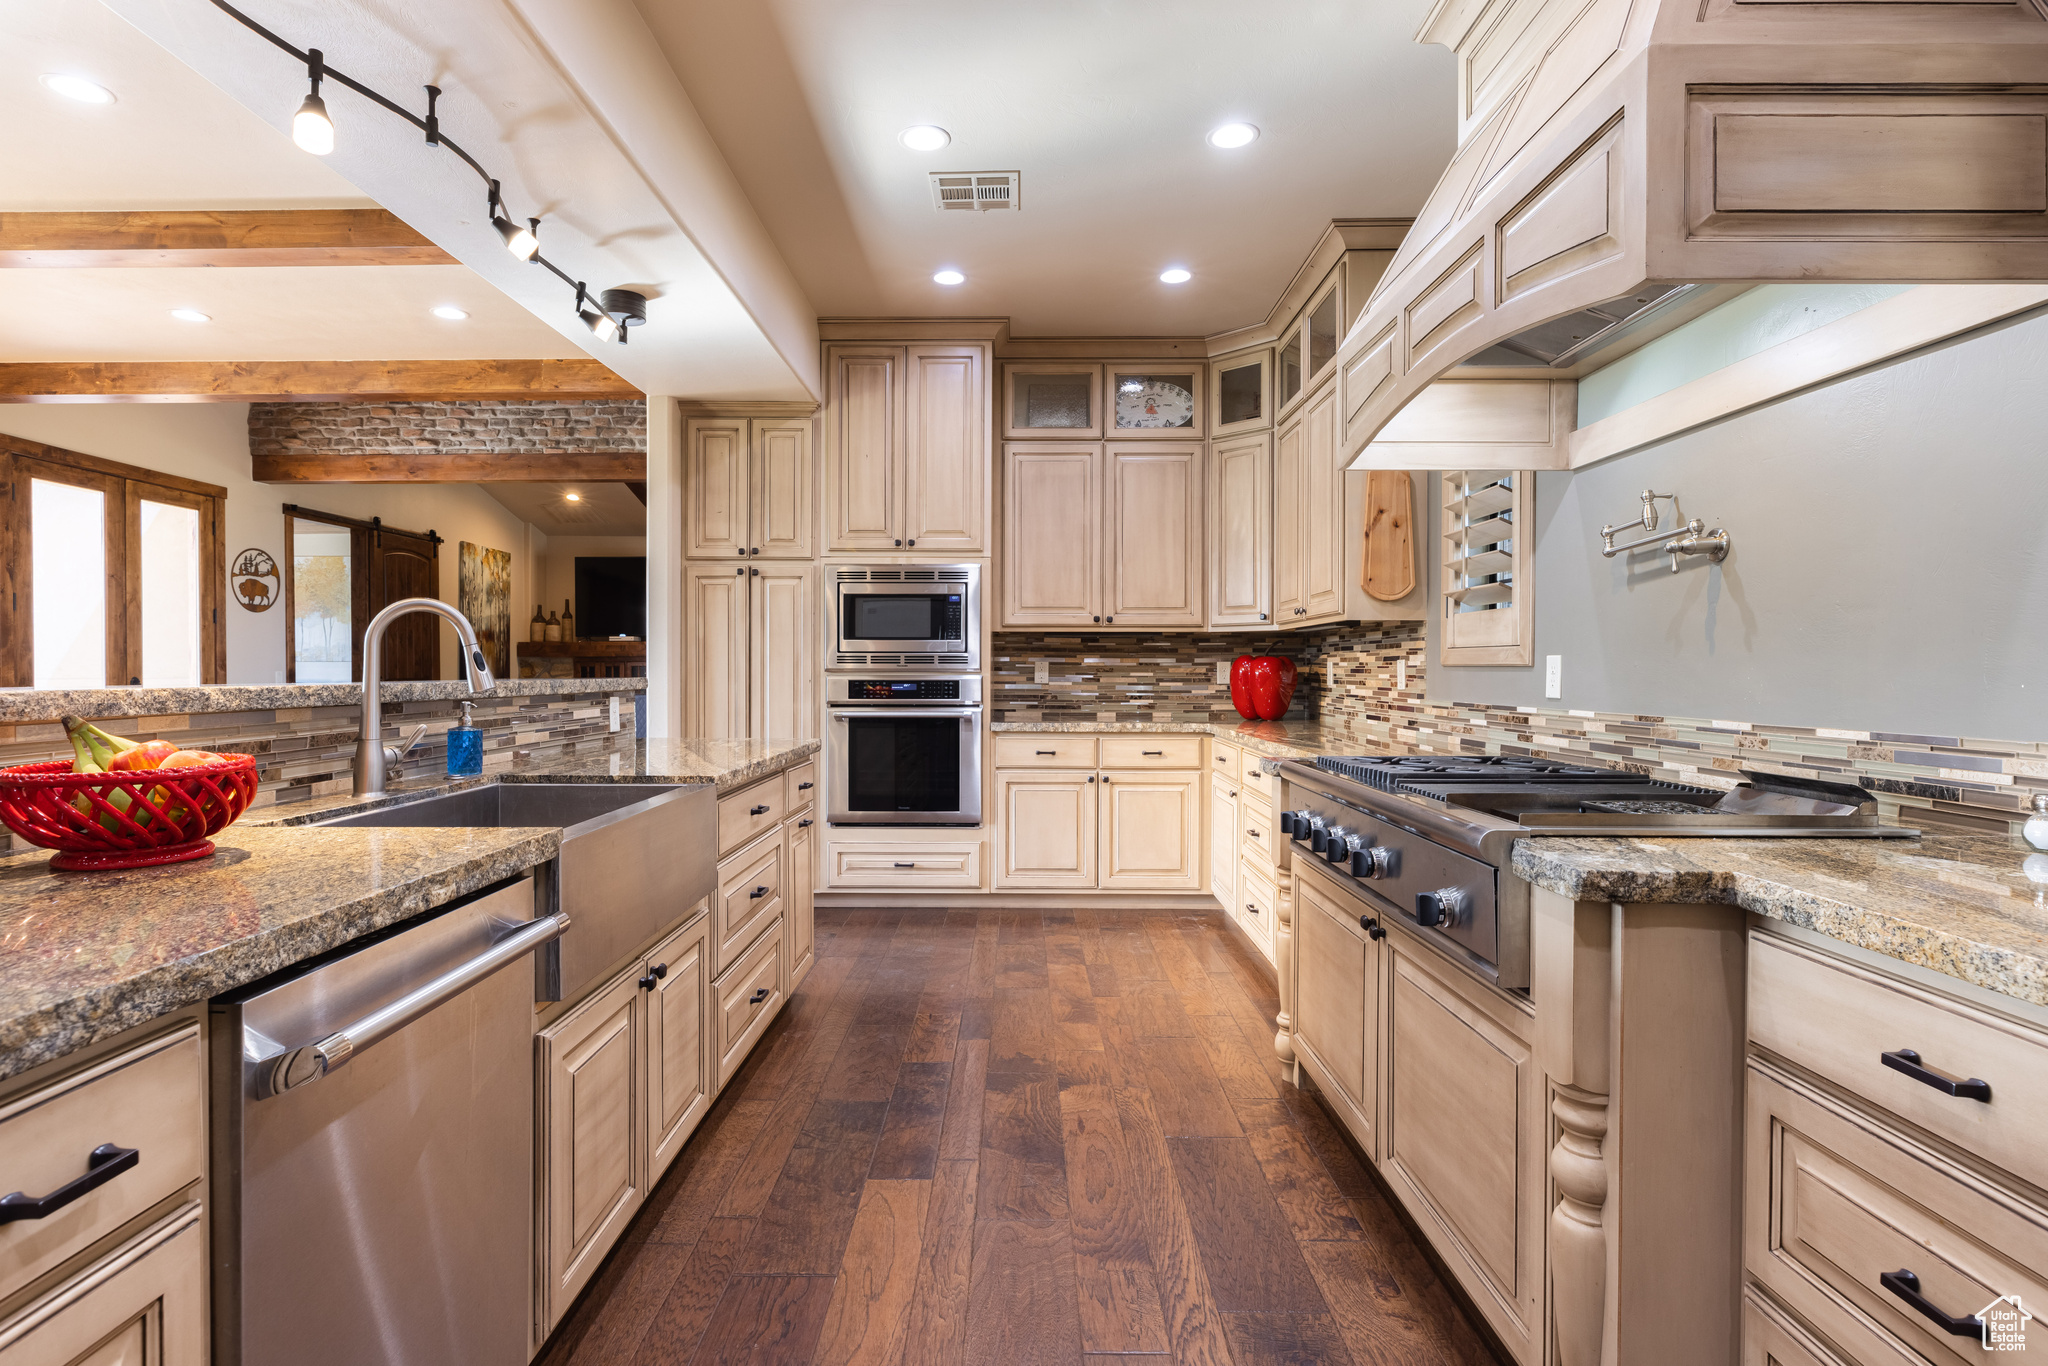 Kitchen with dark hardwood / wood-style floors, backsplash, beam ceiling, stainless steel appliances, and light stone counters